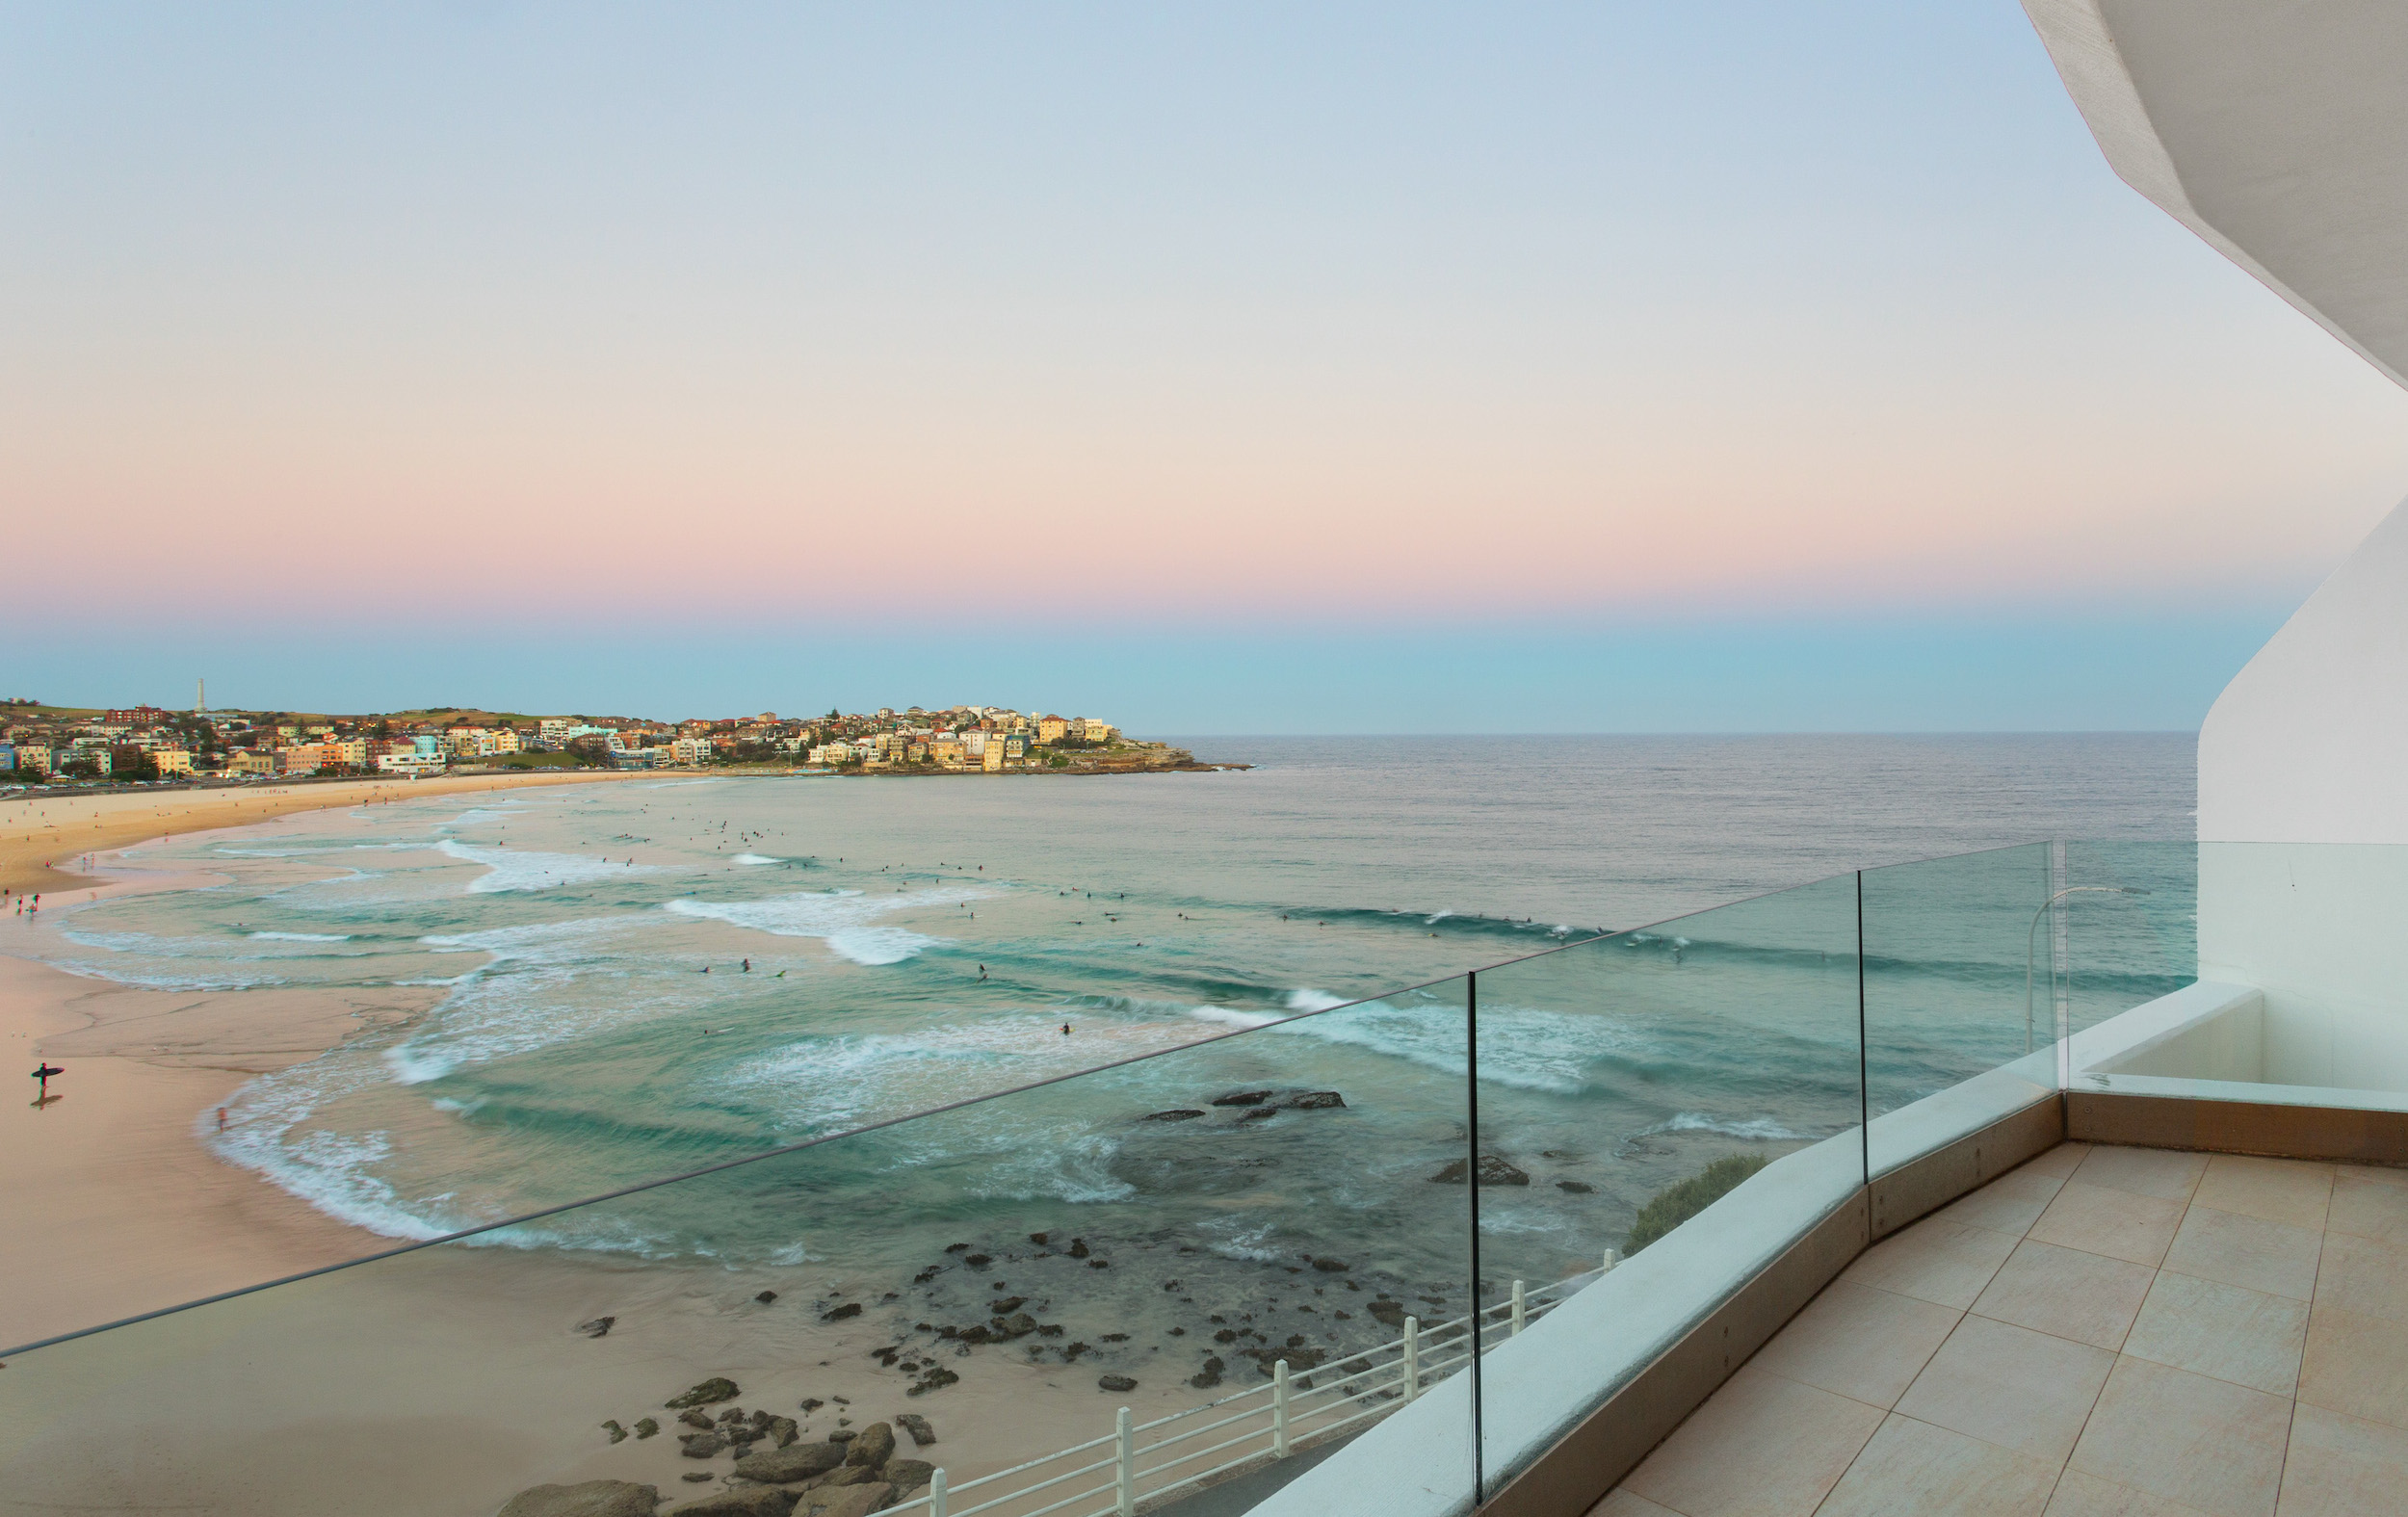 View of Bondi Beach at sunset taken from above with an orange-blue hazy sky